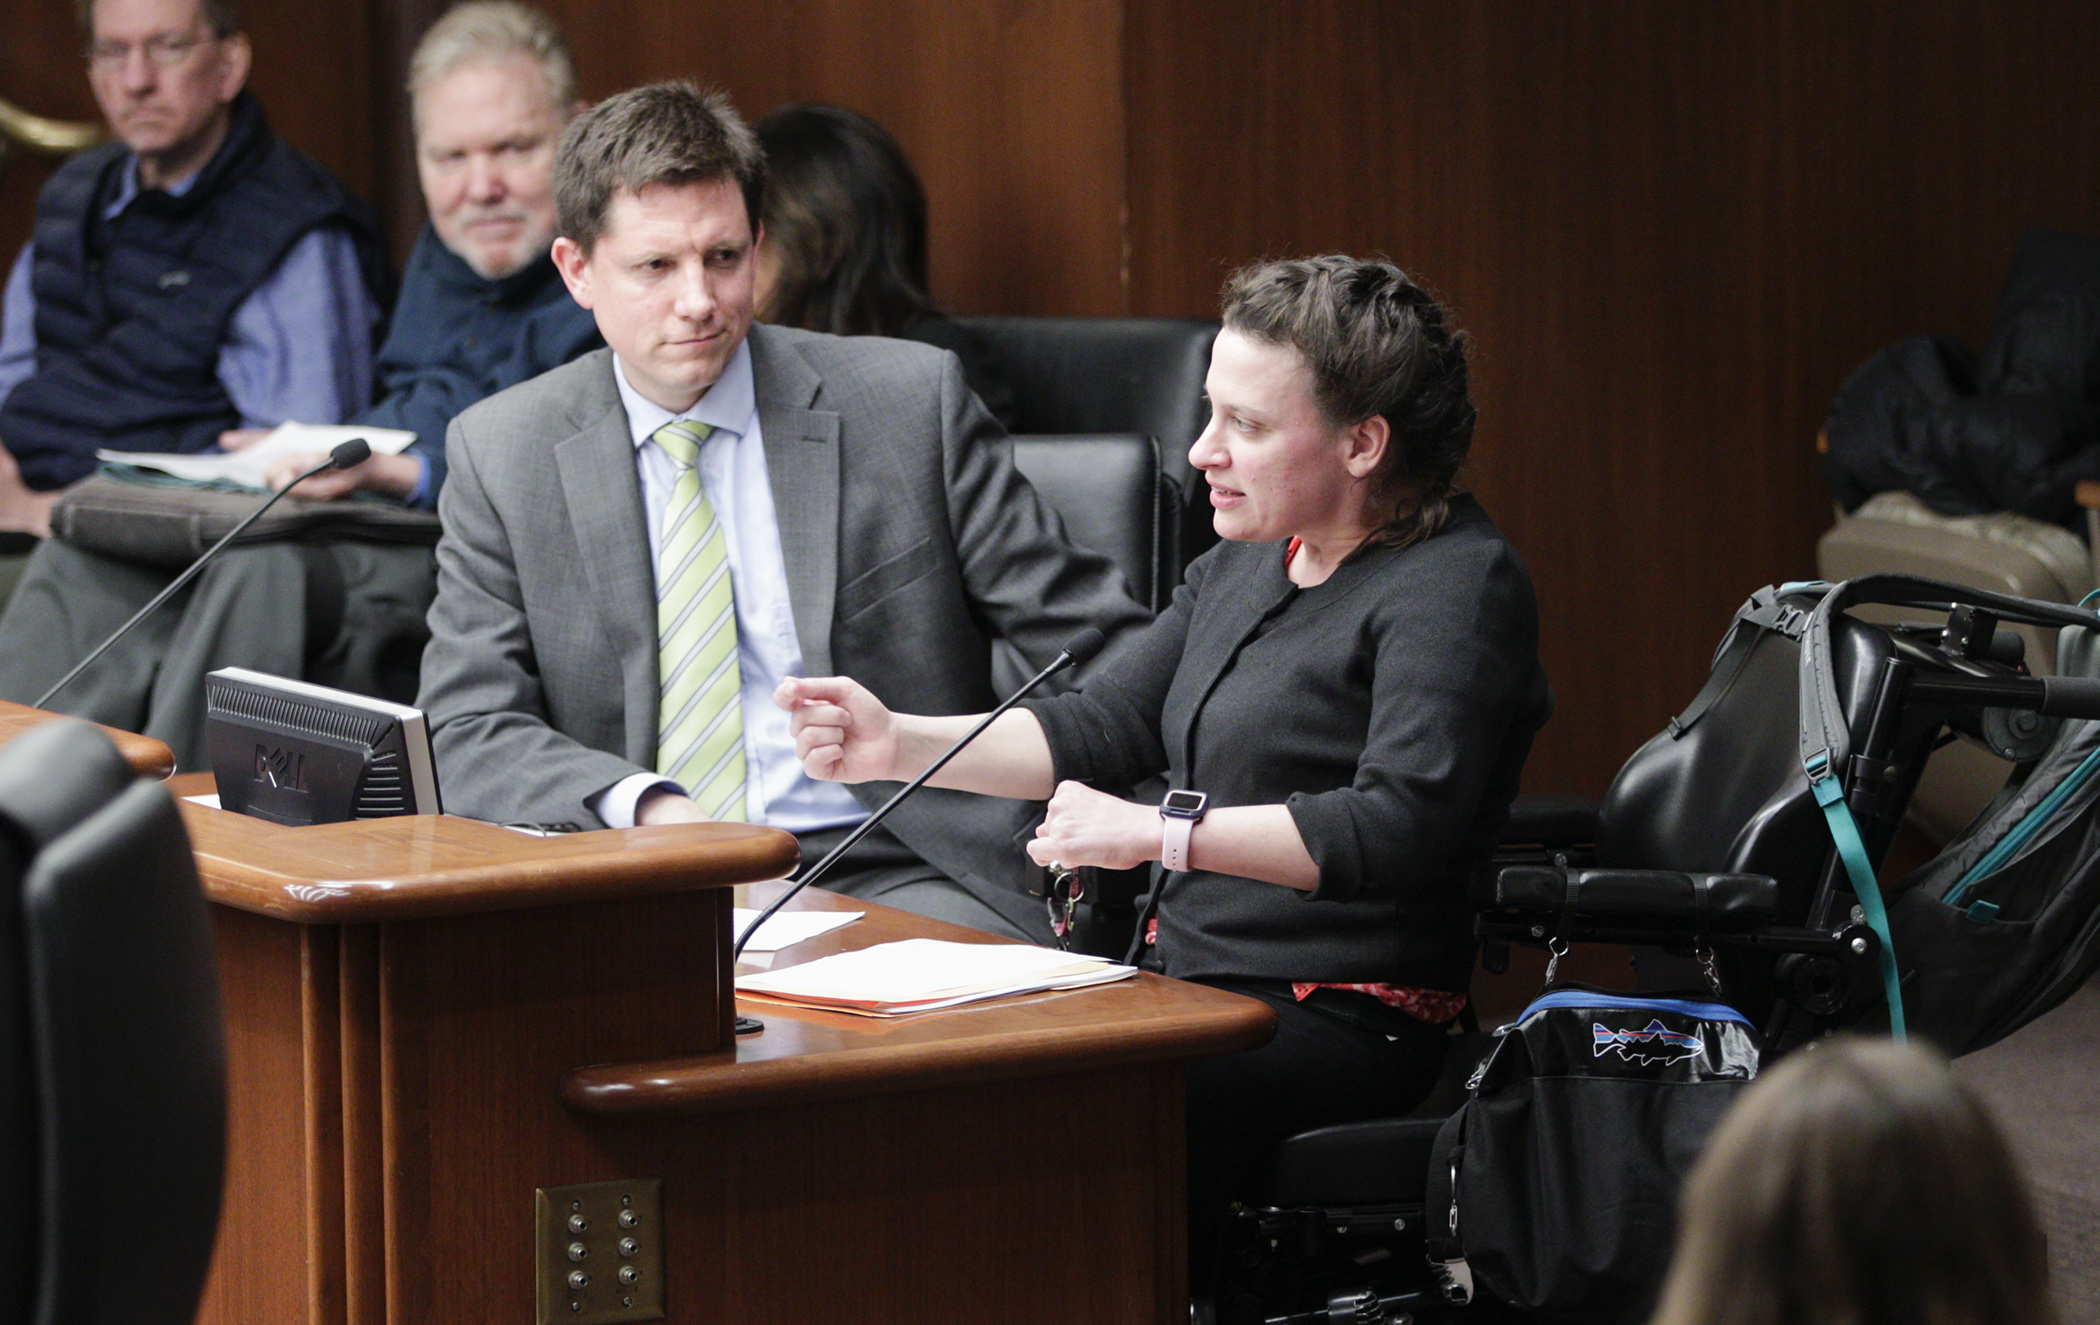 Katrina Simons, a personal care assistant client, testifies on HF3654 before the House Long-Term Care Division March 9. Sponsored by Rep. Todd Lippert, left, the bill would provide for new PCA rate reform. Photo by Paul Battaglia